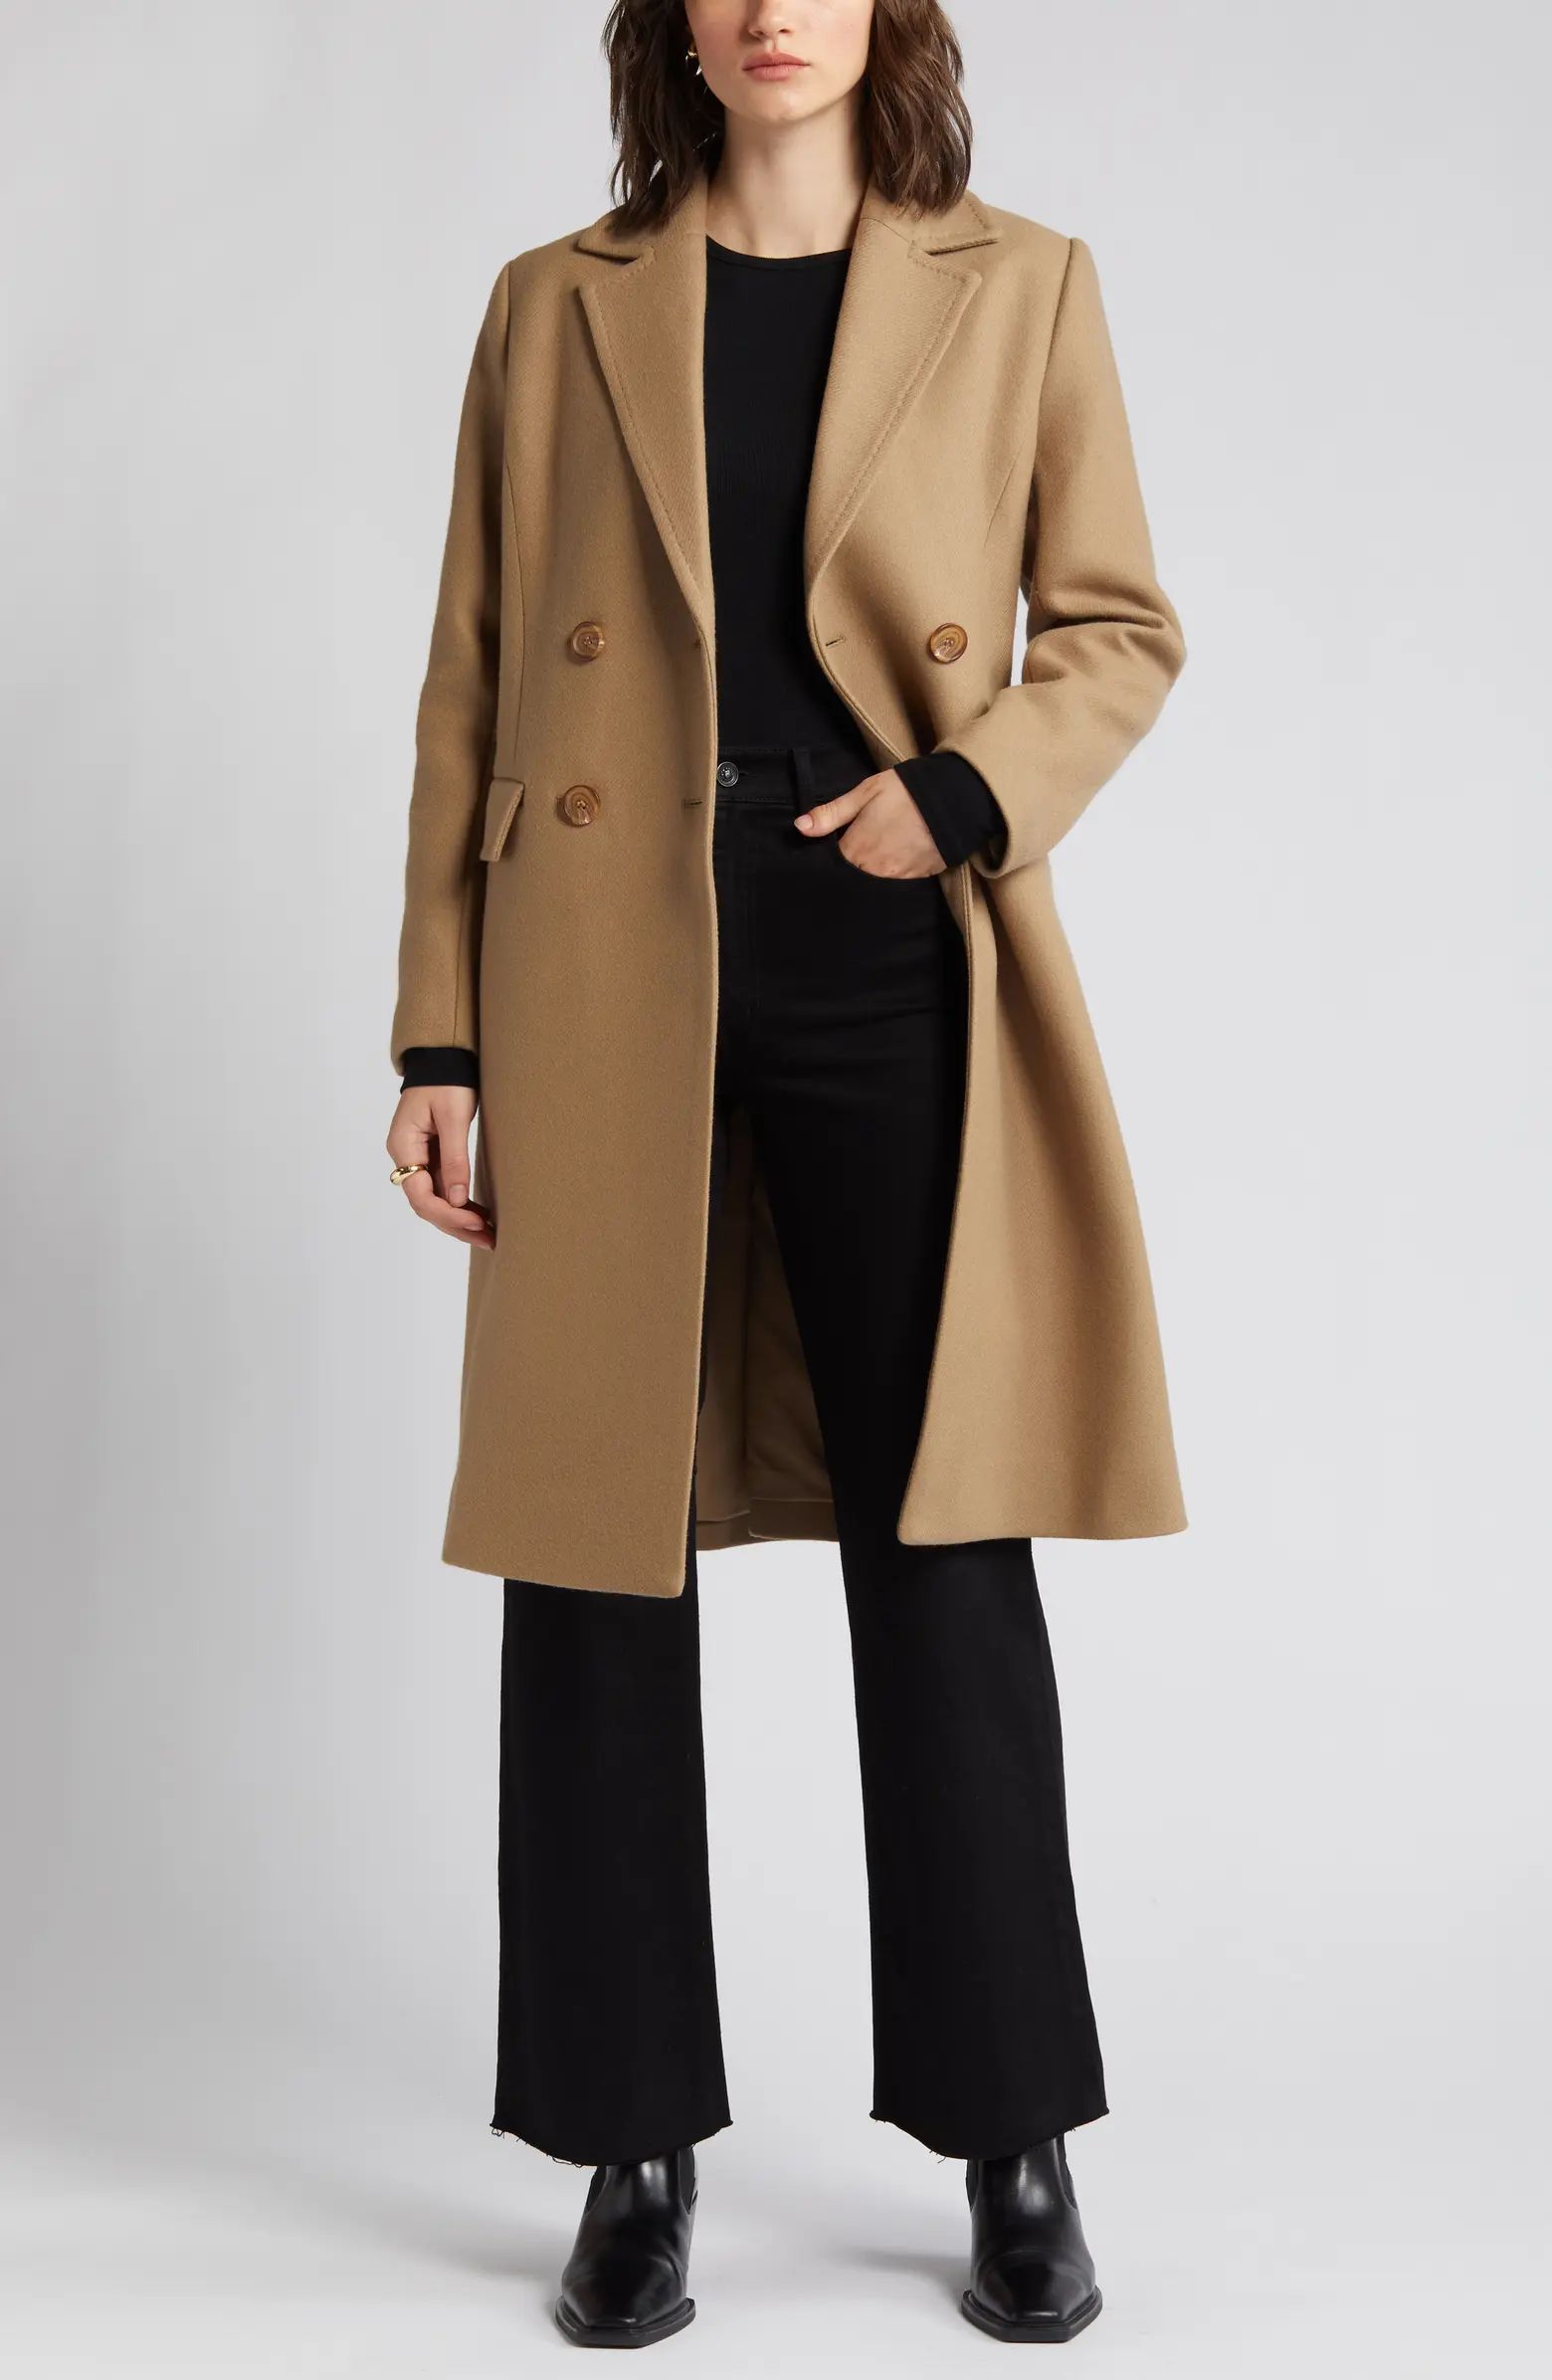 Nordstrom Signature Double Breasted Wool Blend Coat | Nordstrom | Nordstrom